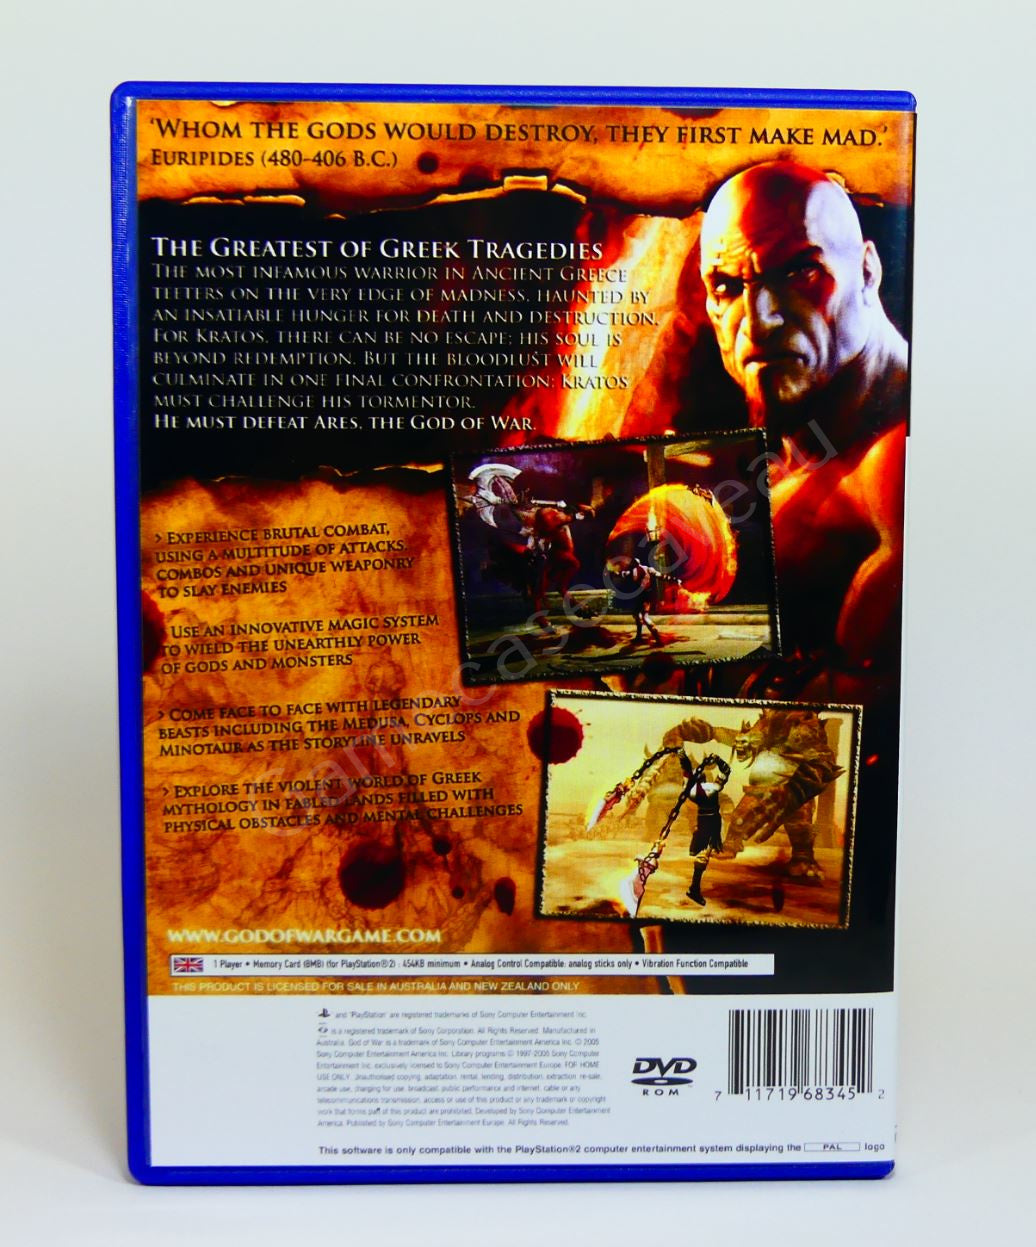 God of War - PS2 Replacement Case